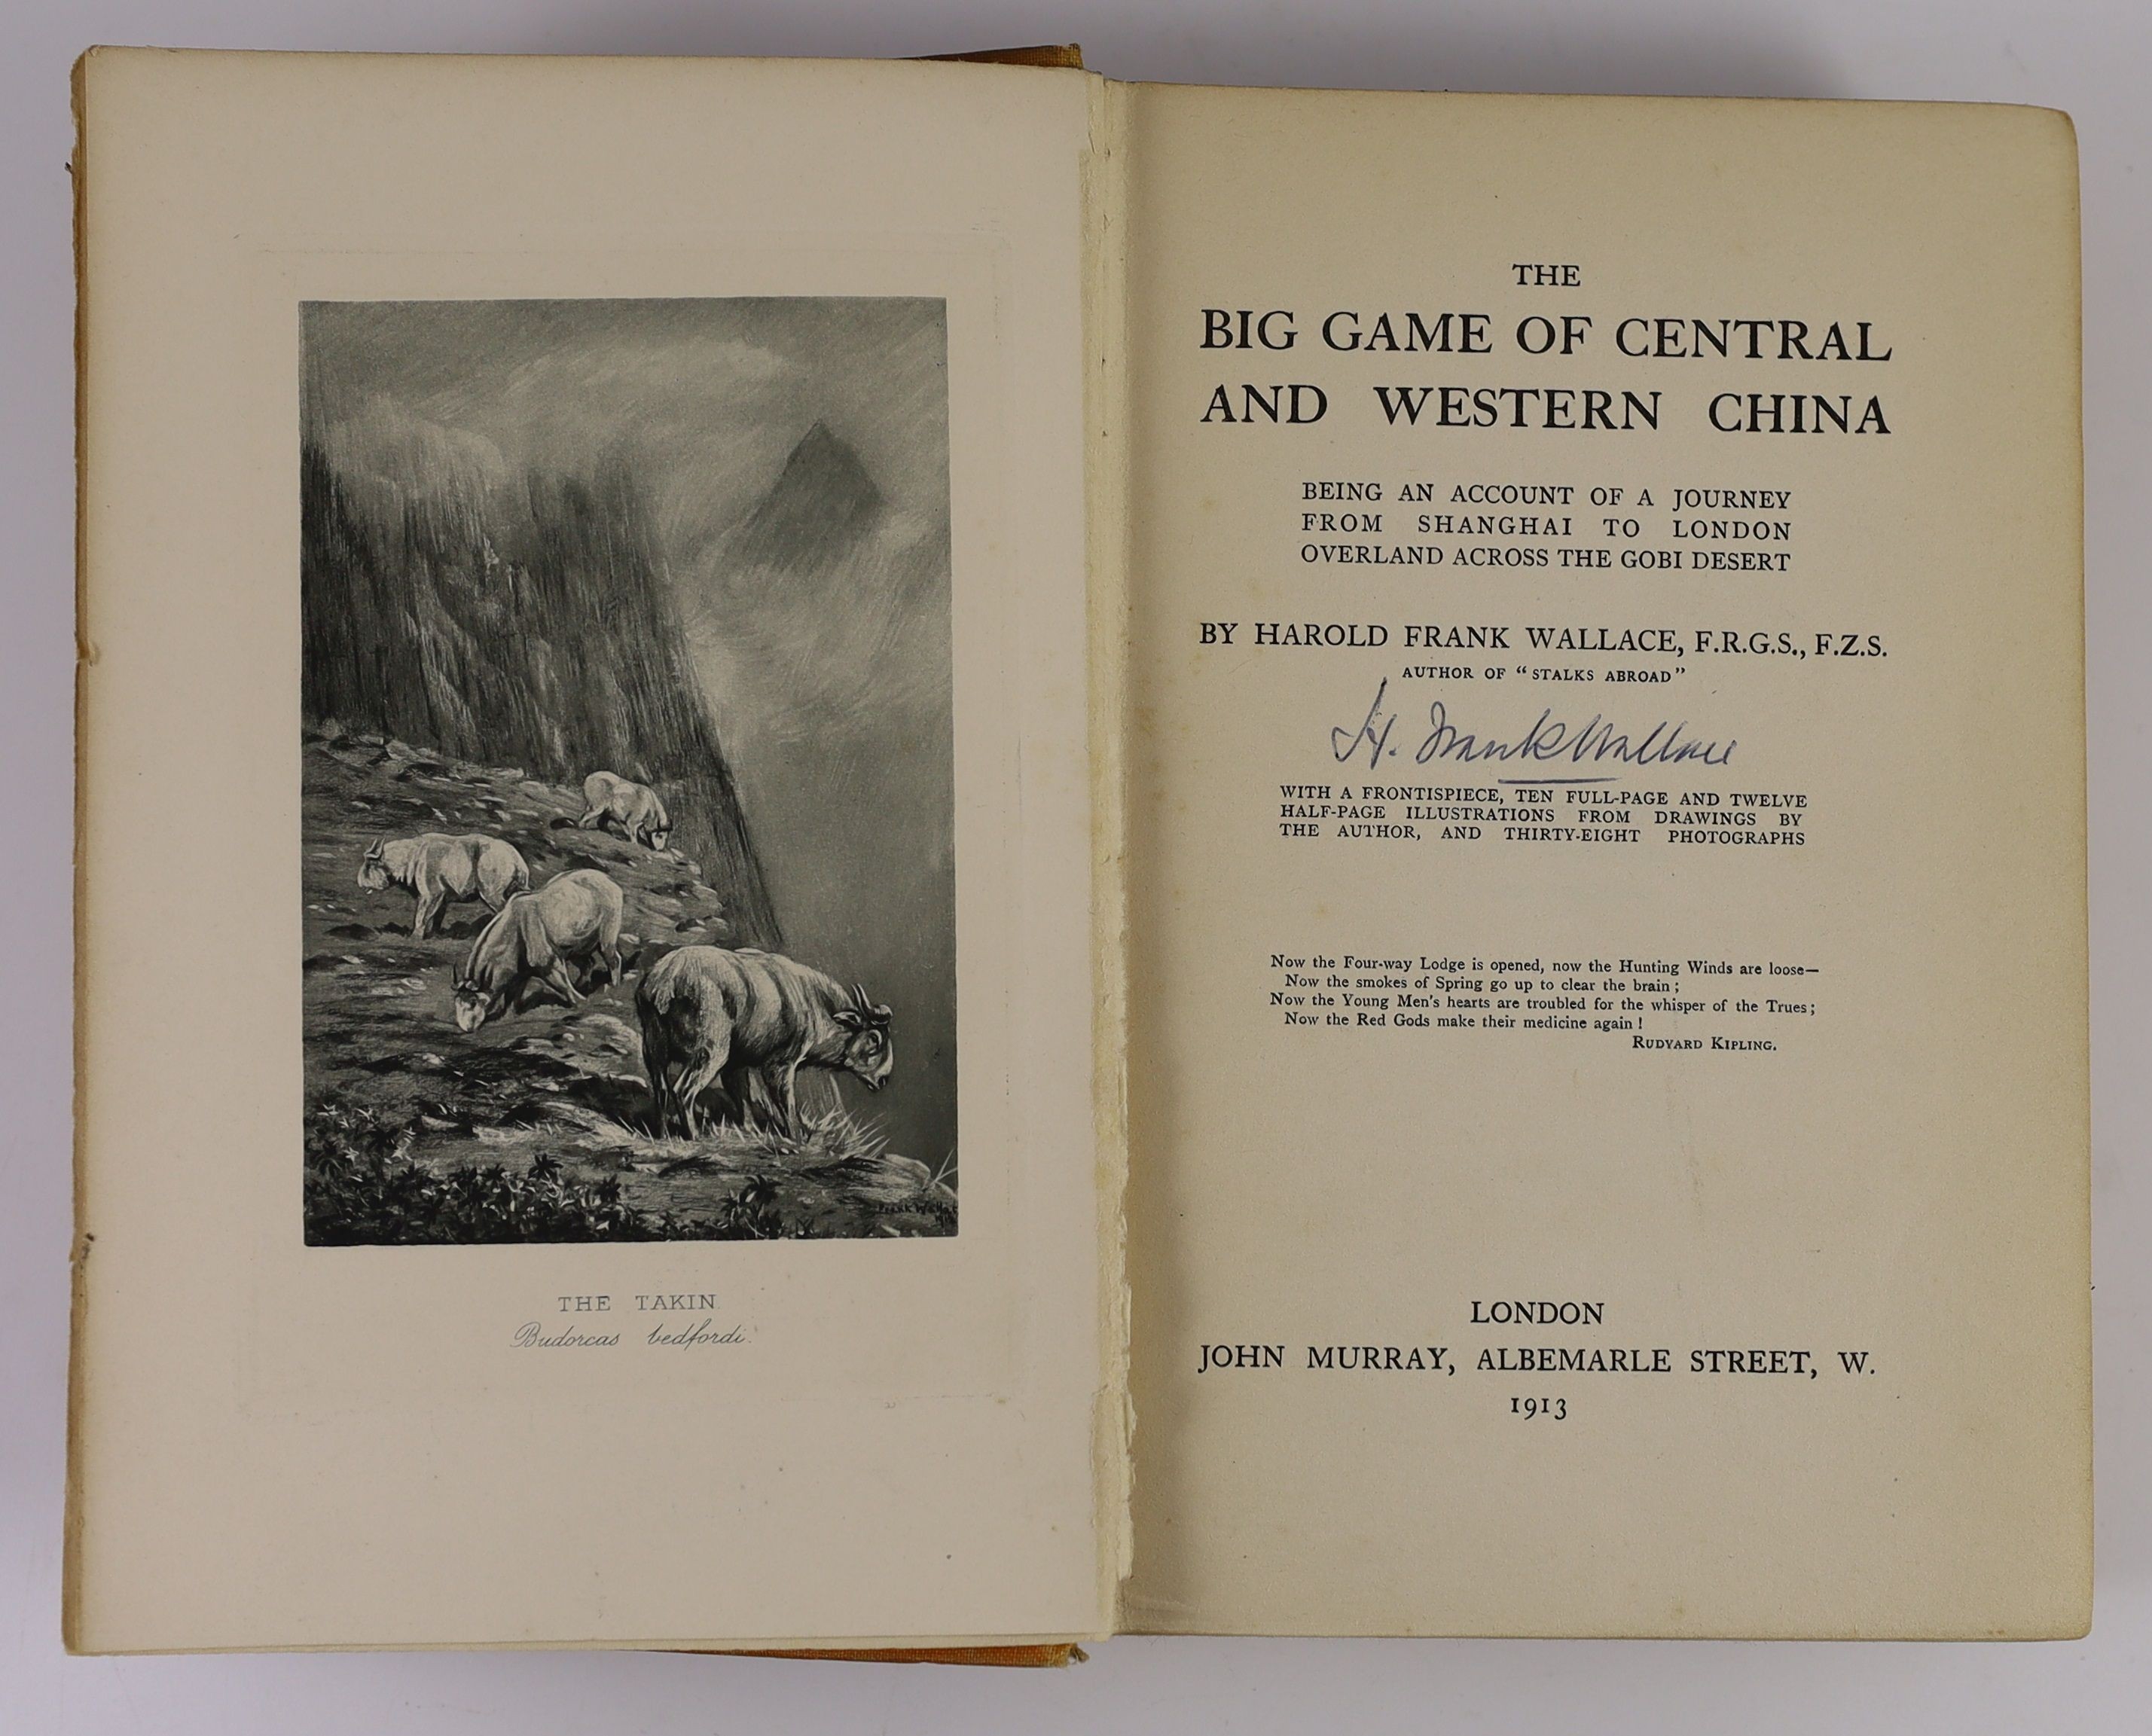 Wallace, Harold Frank. The Big Game of Central and Western China Being an Account of a Journey from Shanghai to London Overland Across the Gobi Desert. London, 1913. Original cloth binding rubbed and worn, the rear spine